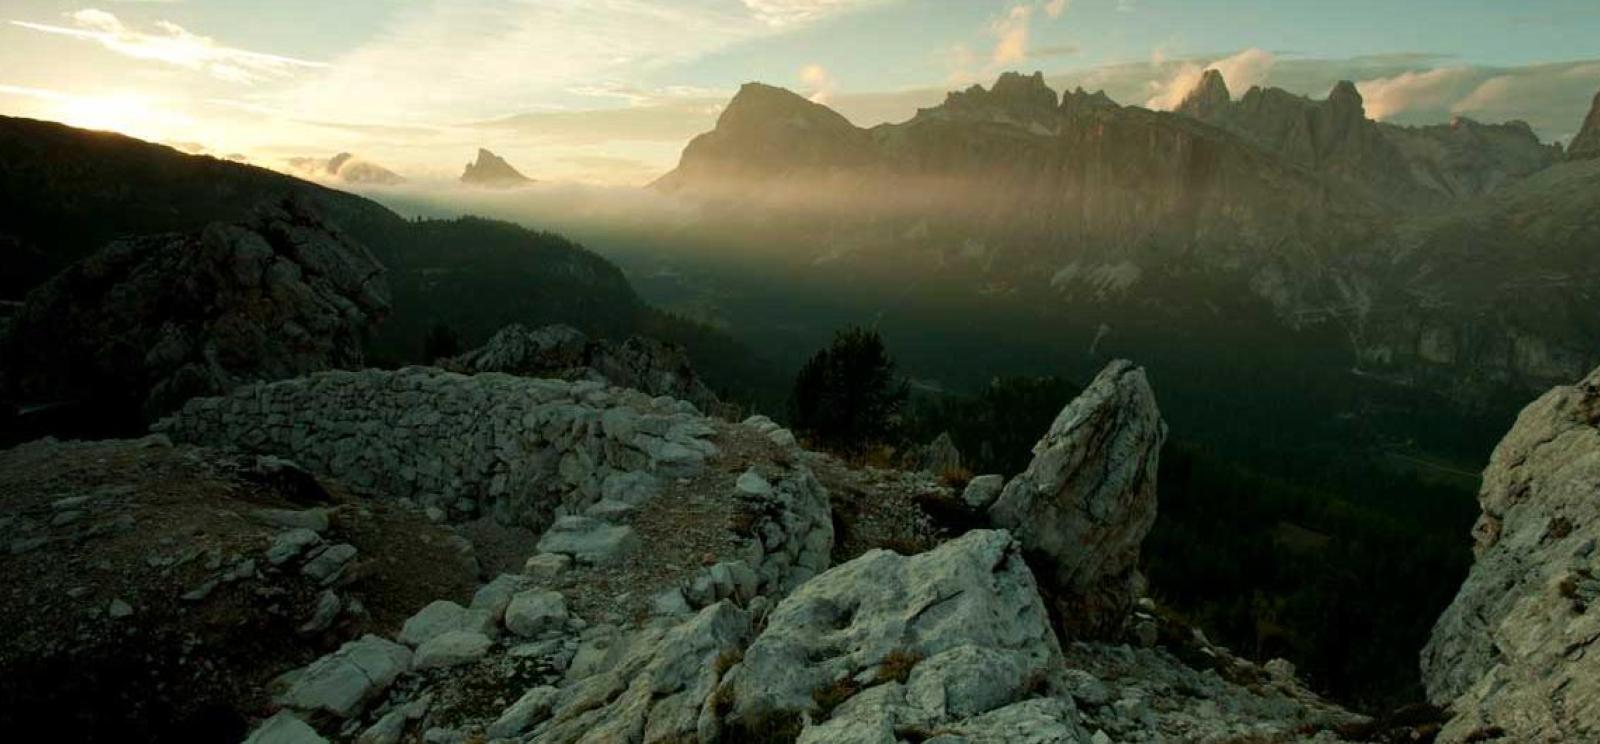 Panoramic shot from a mountain ridge at sunrise or sunset, facing another mountain ridge in the distance.